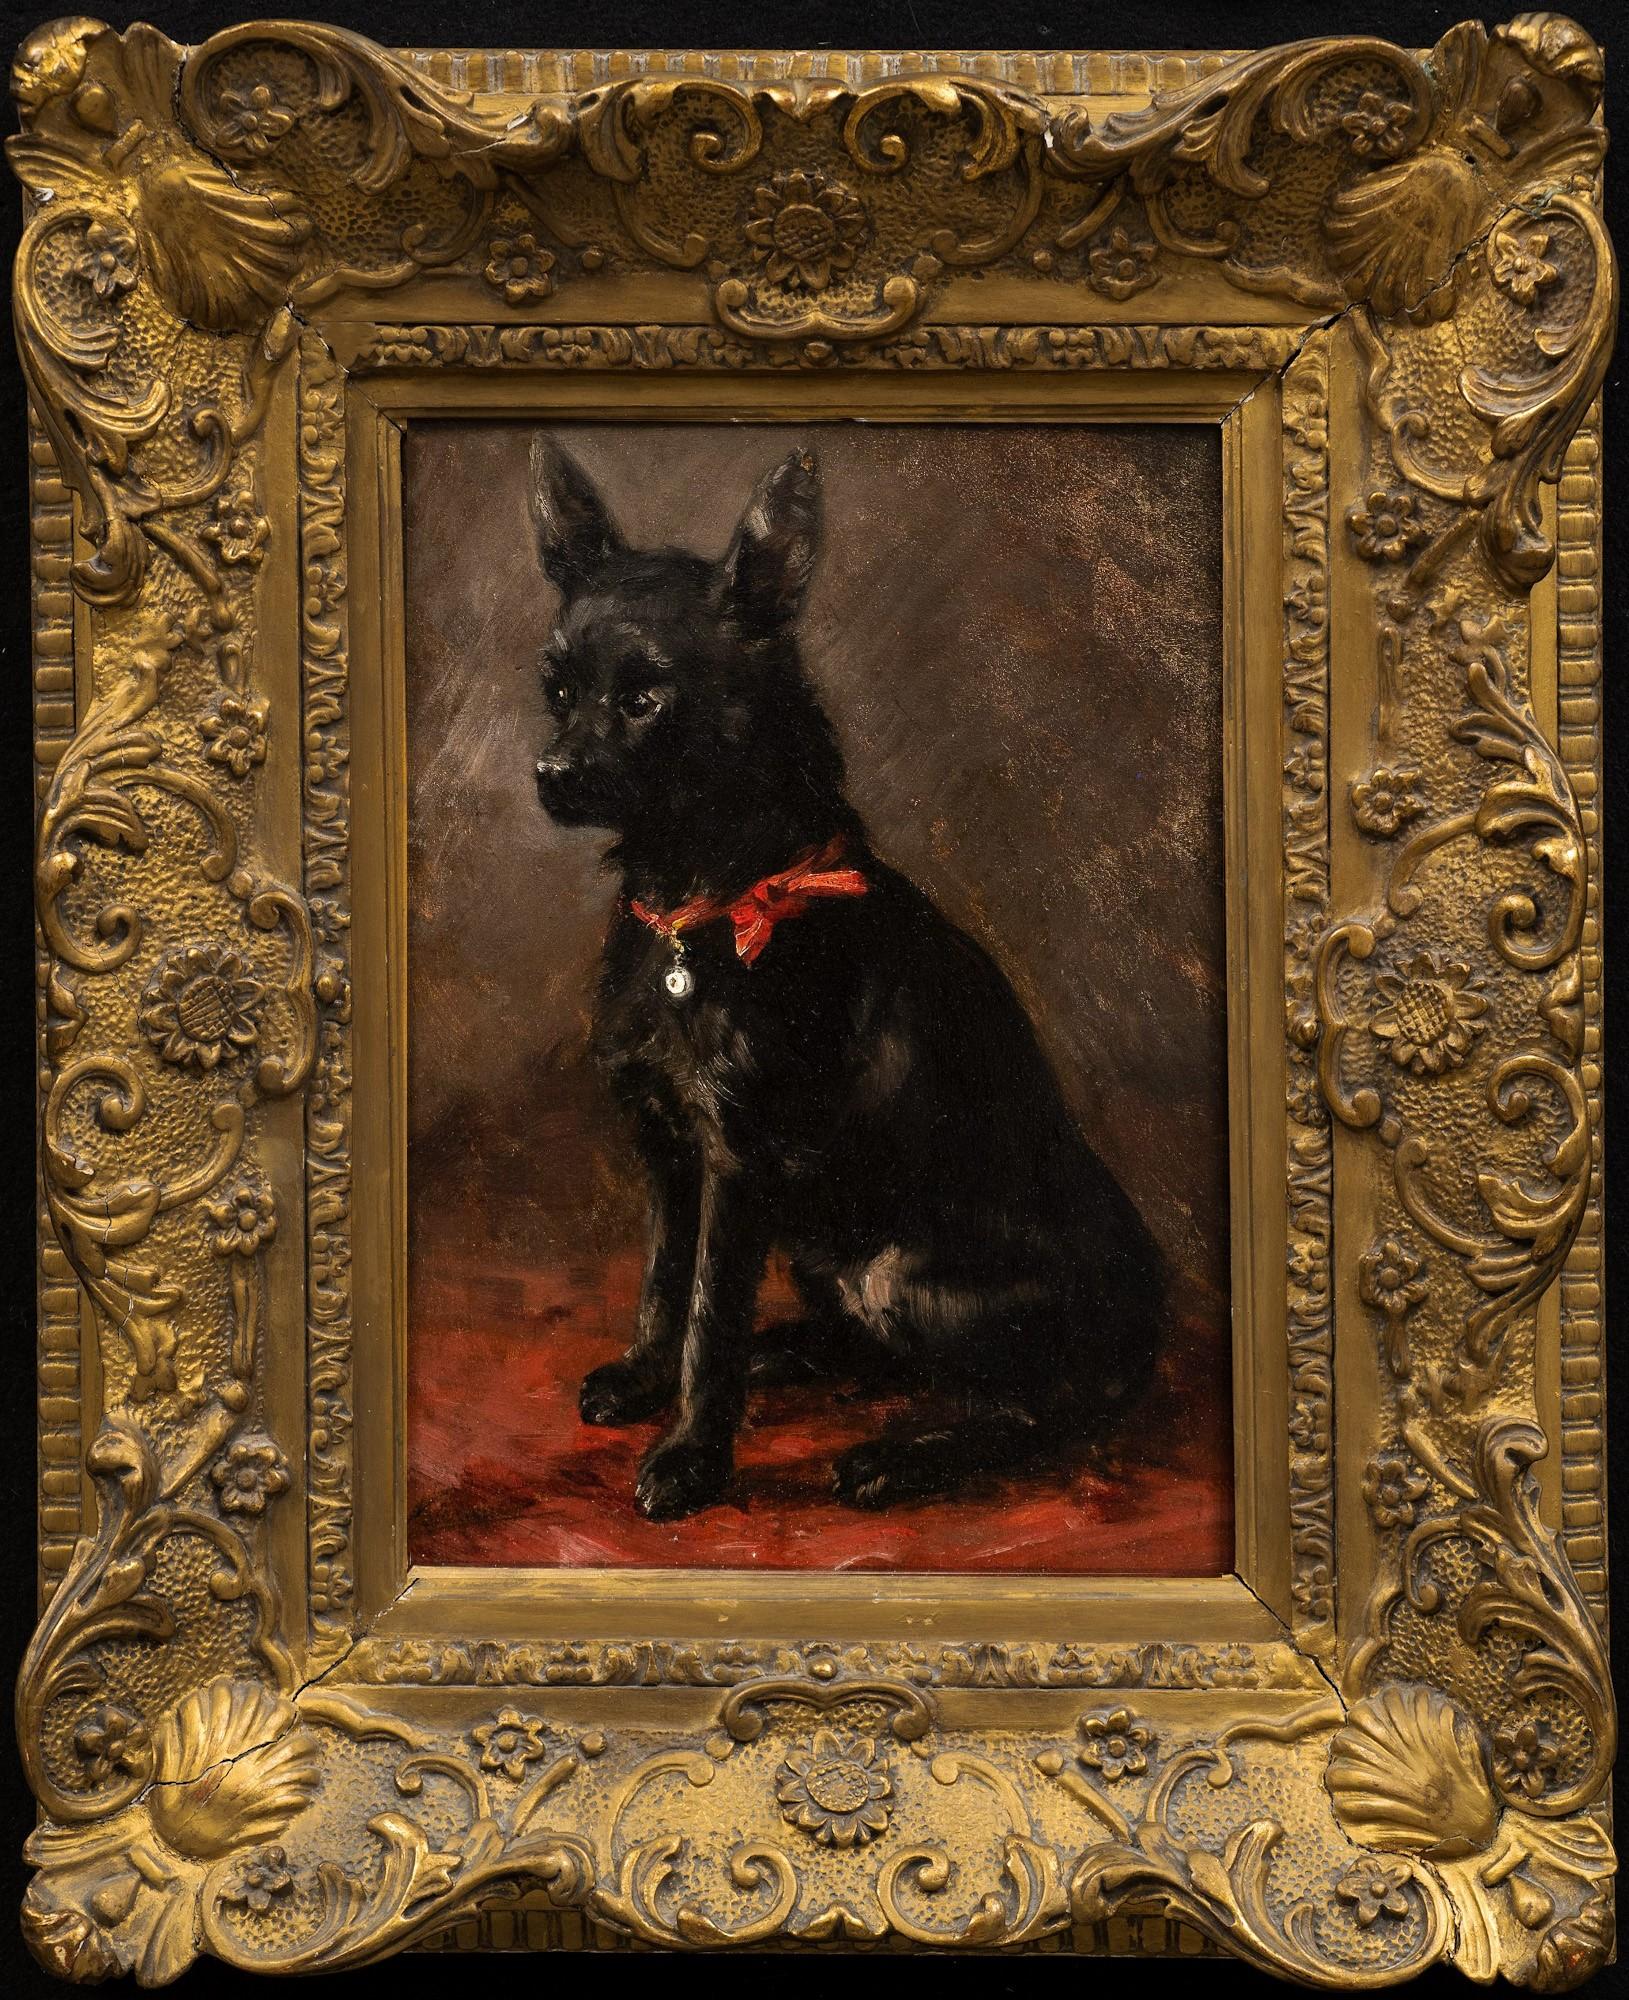 Dog Painting: "Portrait of a Chihuahua with Red Bow" 
Zacharias Noterman (Belgium, France 1824-1890)
Circa. 1870s
Oil on wood panel (mahogany)
Original stucco and gilt frame
13 1/2 x 9 1/2 (22 1/4 x 18 1/4 frame) inches

With the charming dog's